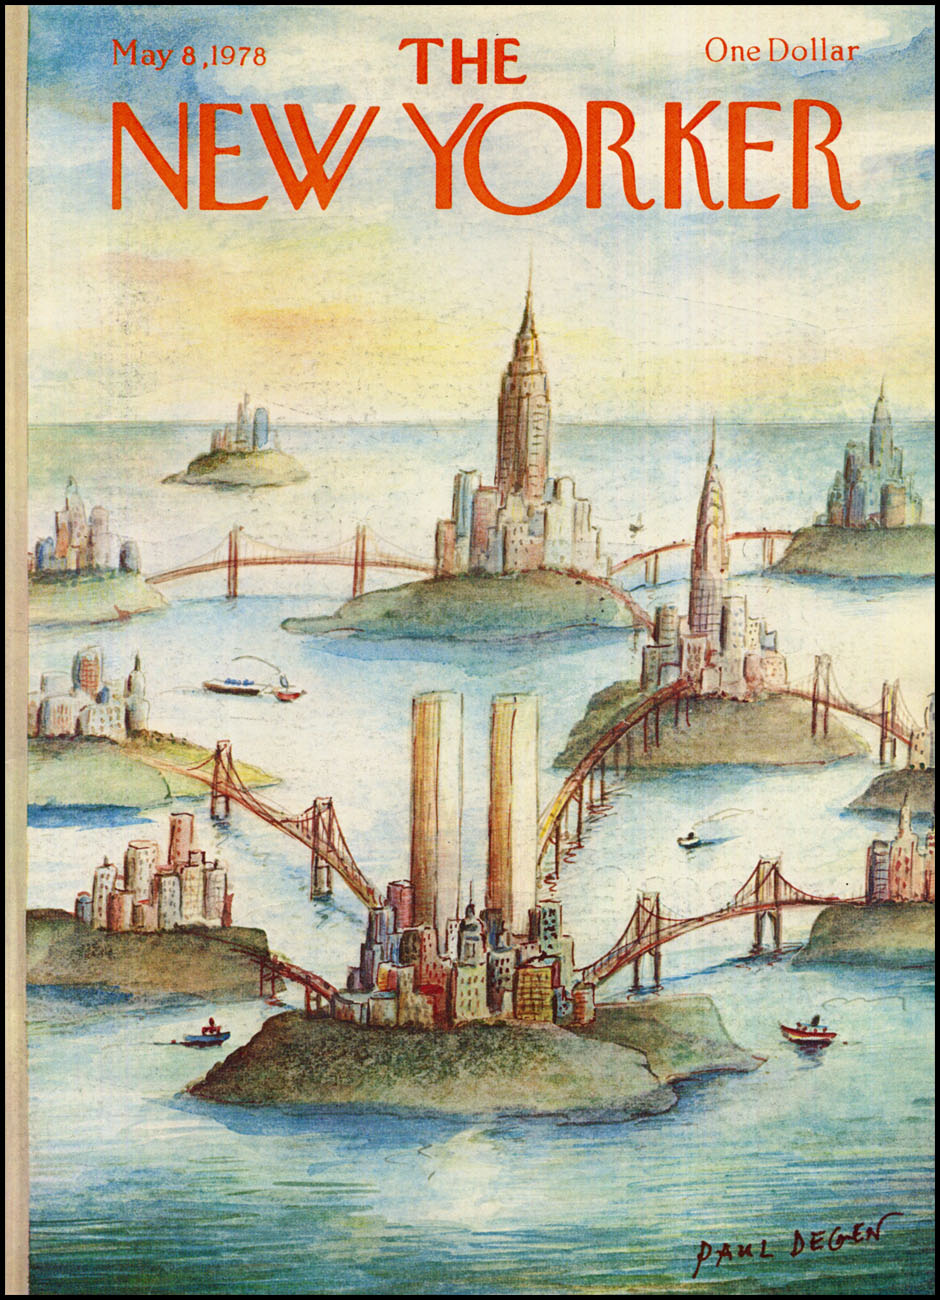 The Pictorial Arts: New York New York